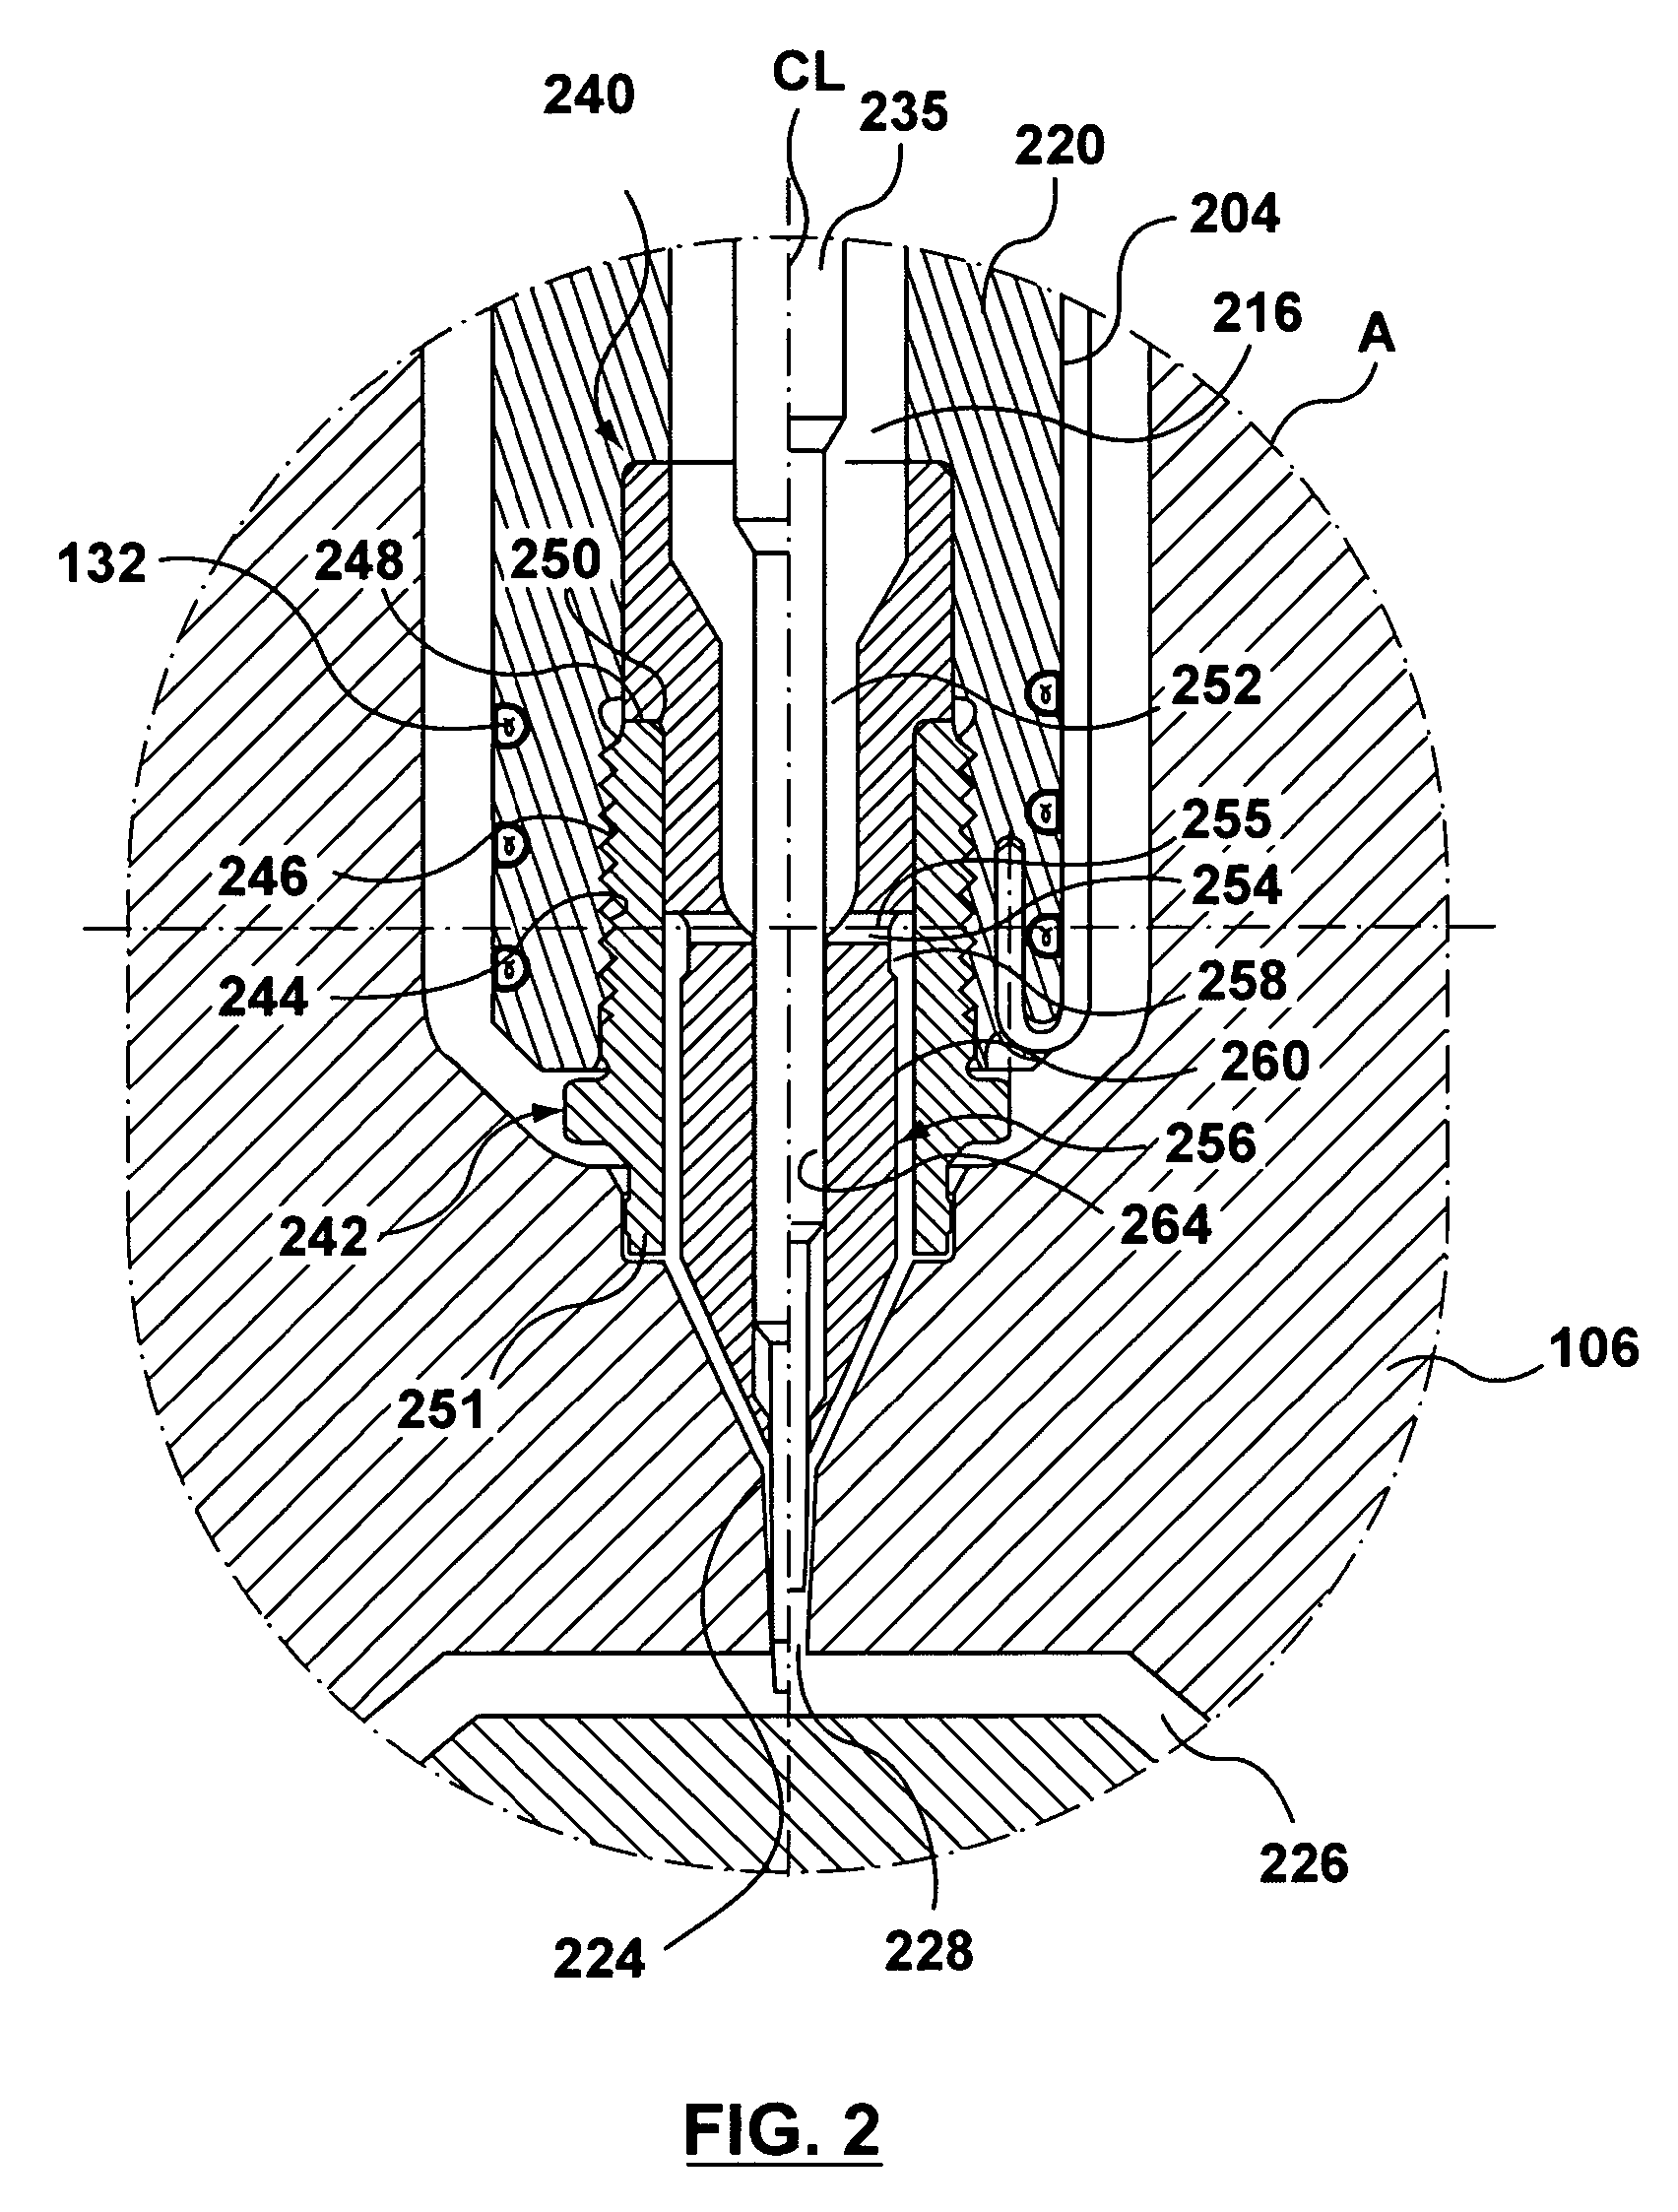 Valve-gated injection molding nozzle having an annular flow